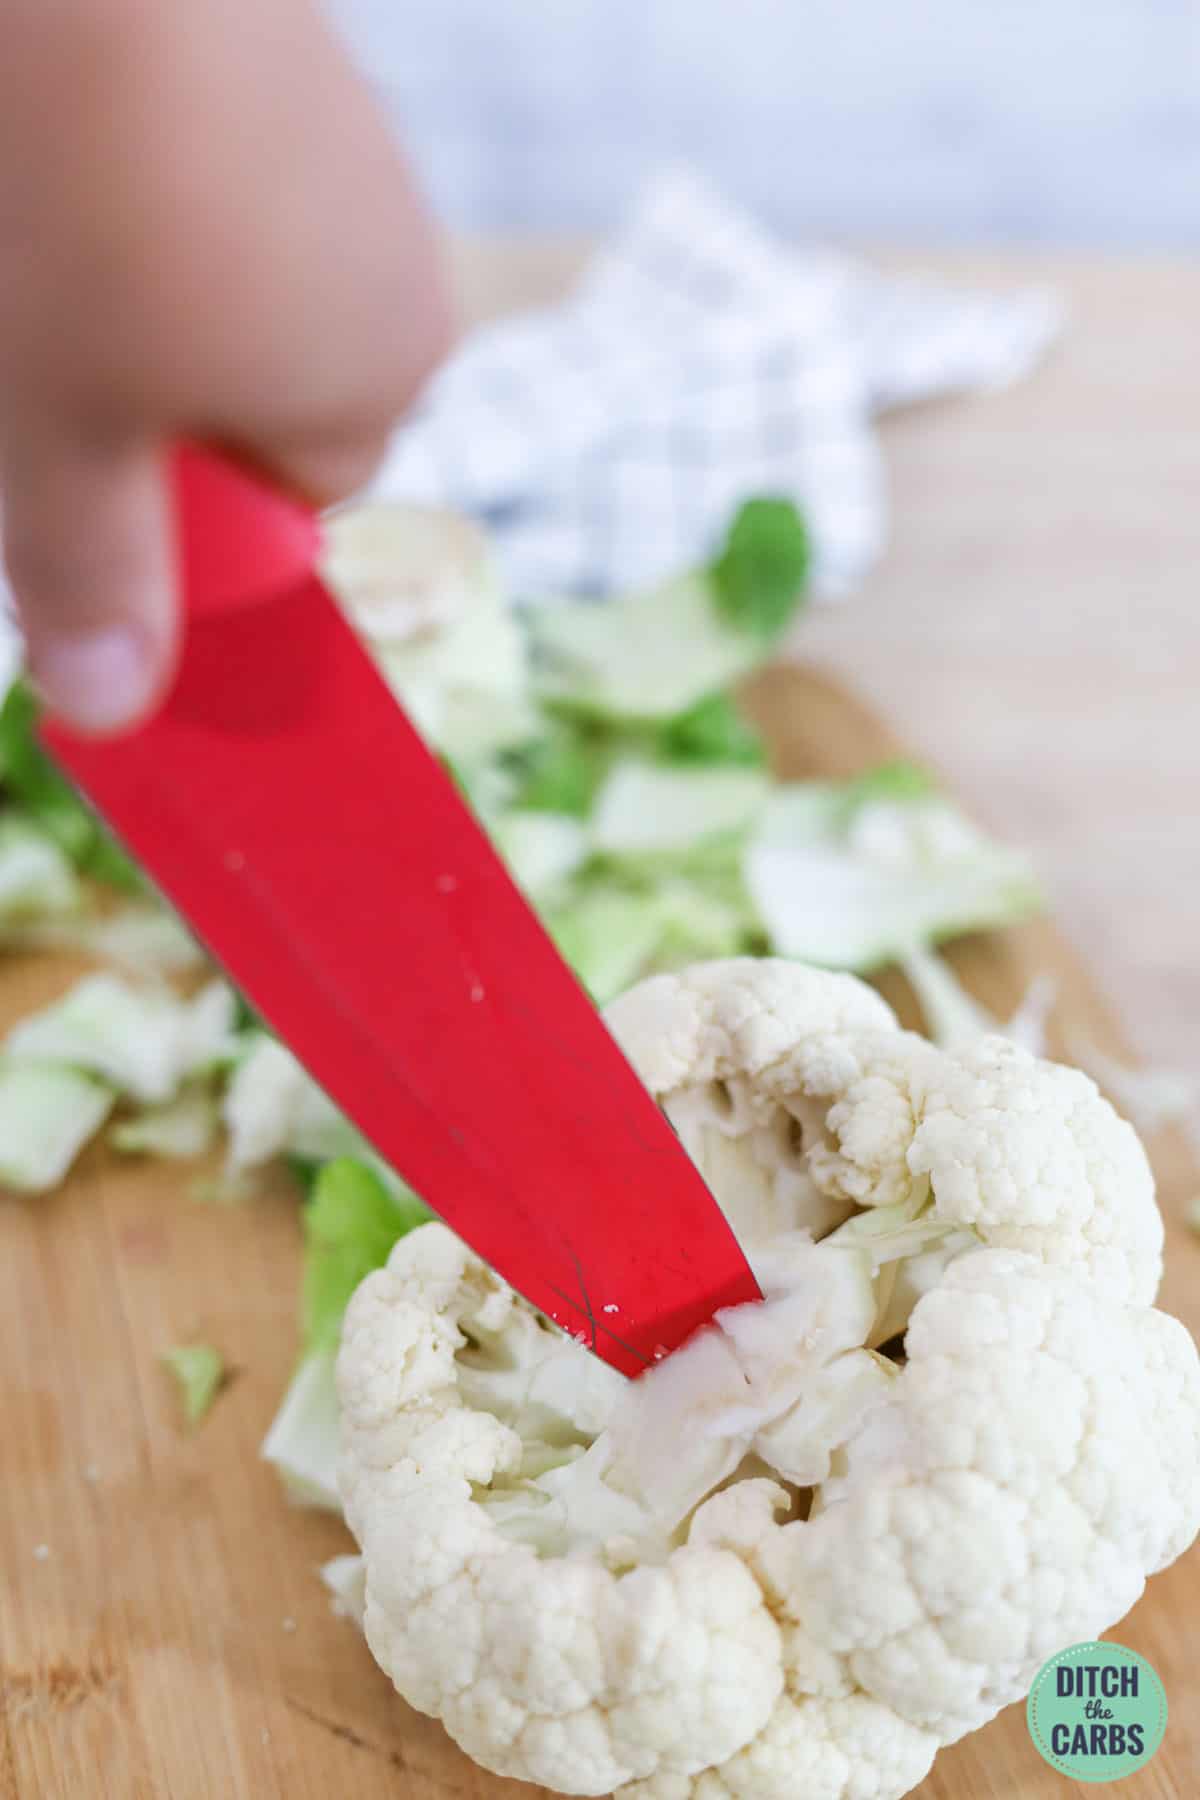 a red knife cutting into a whole cauliflower